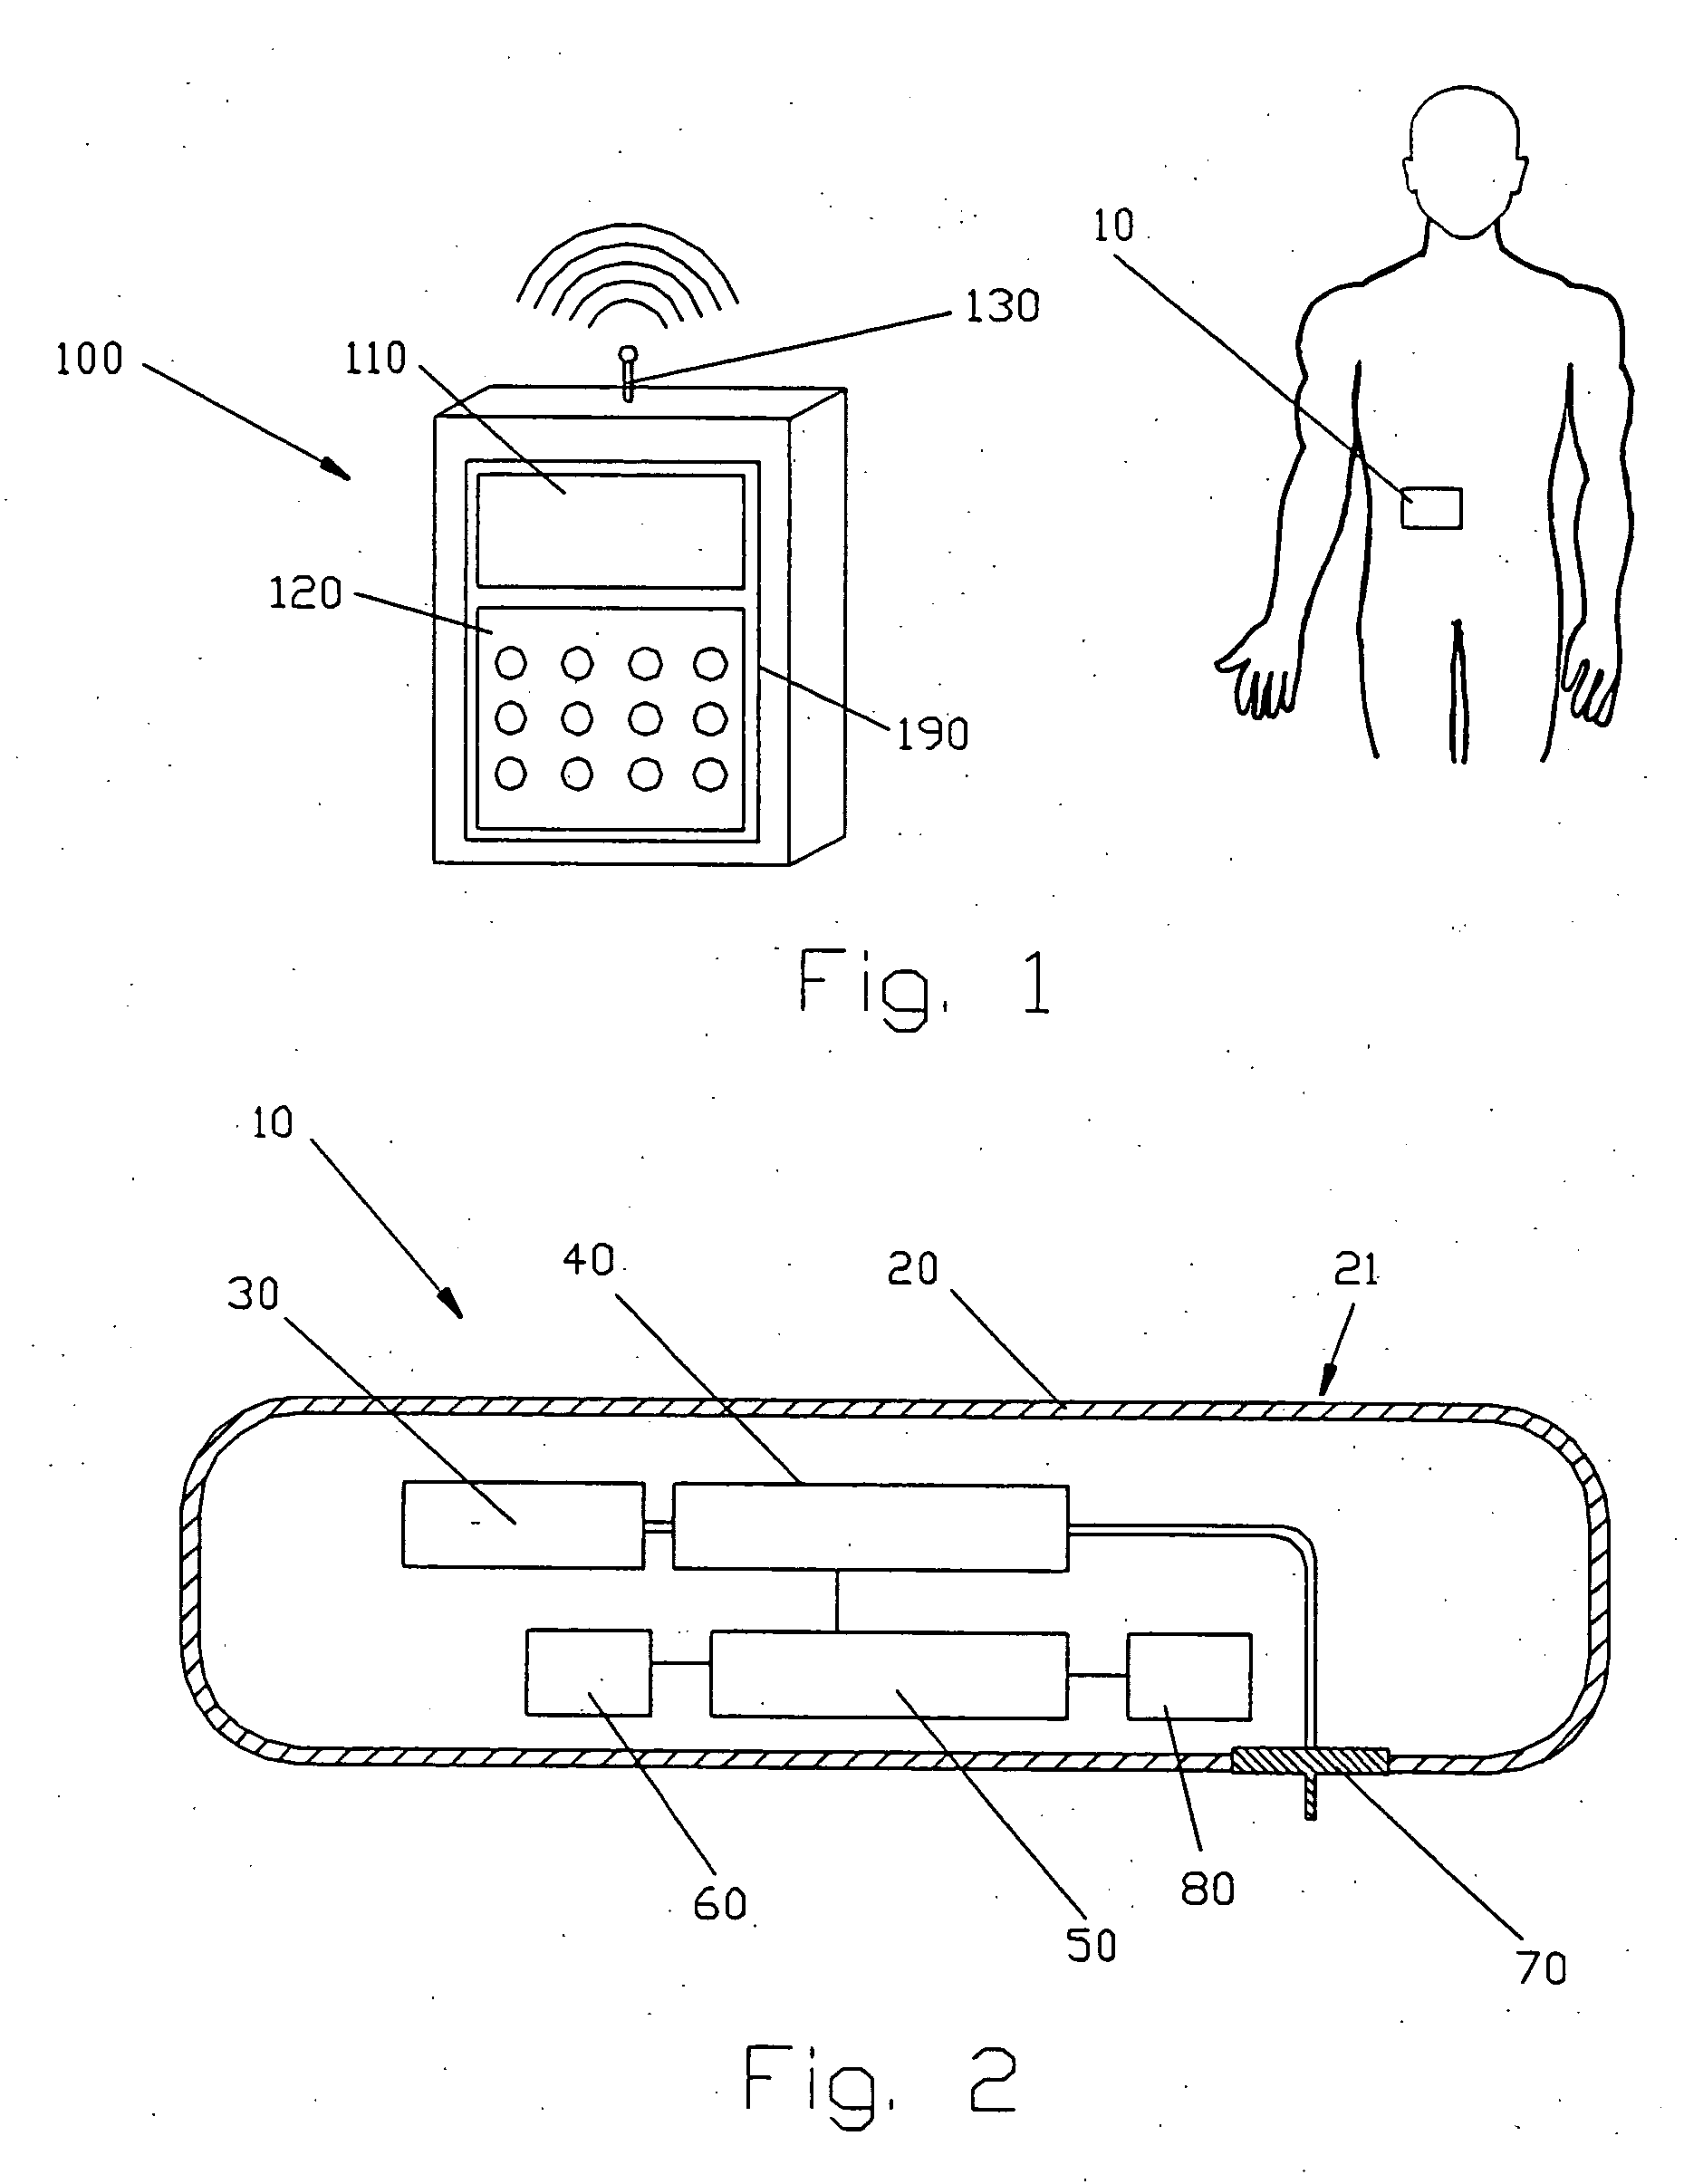 Laminated patient infusion device